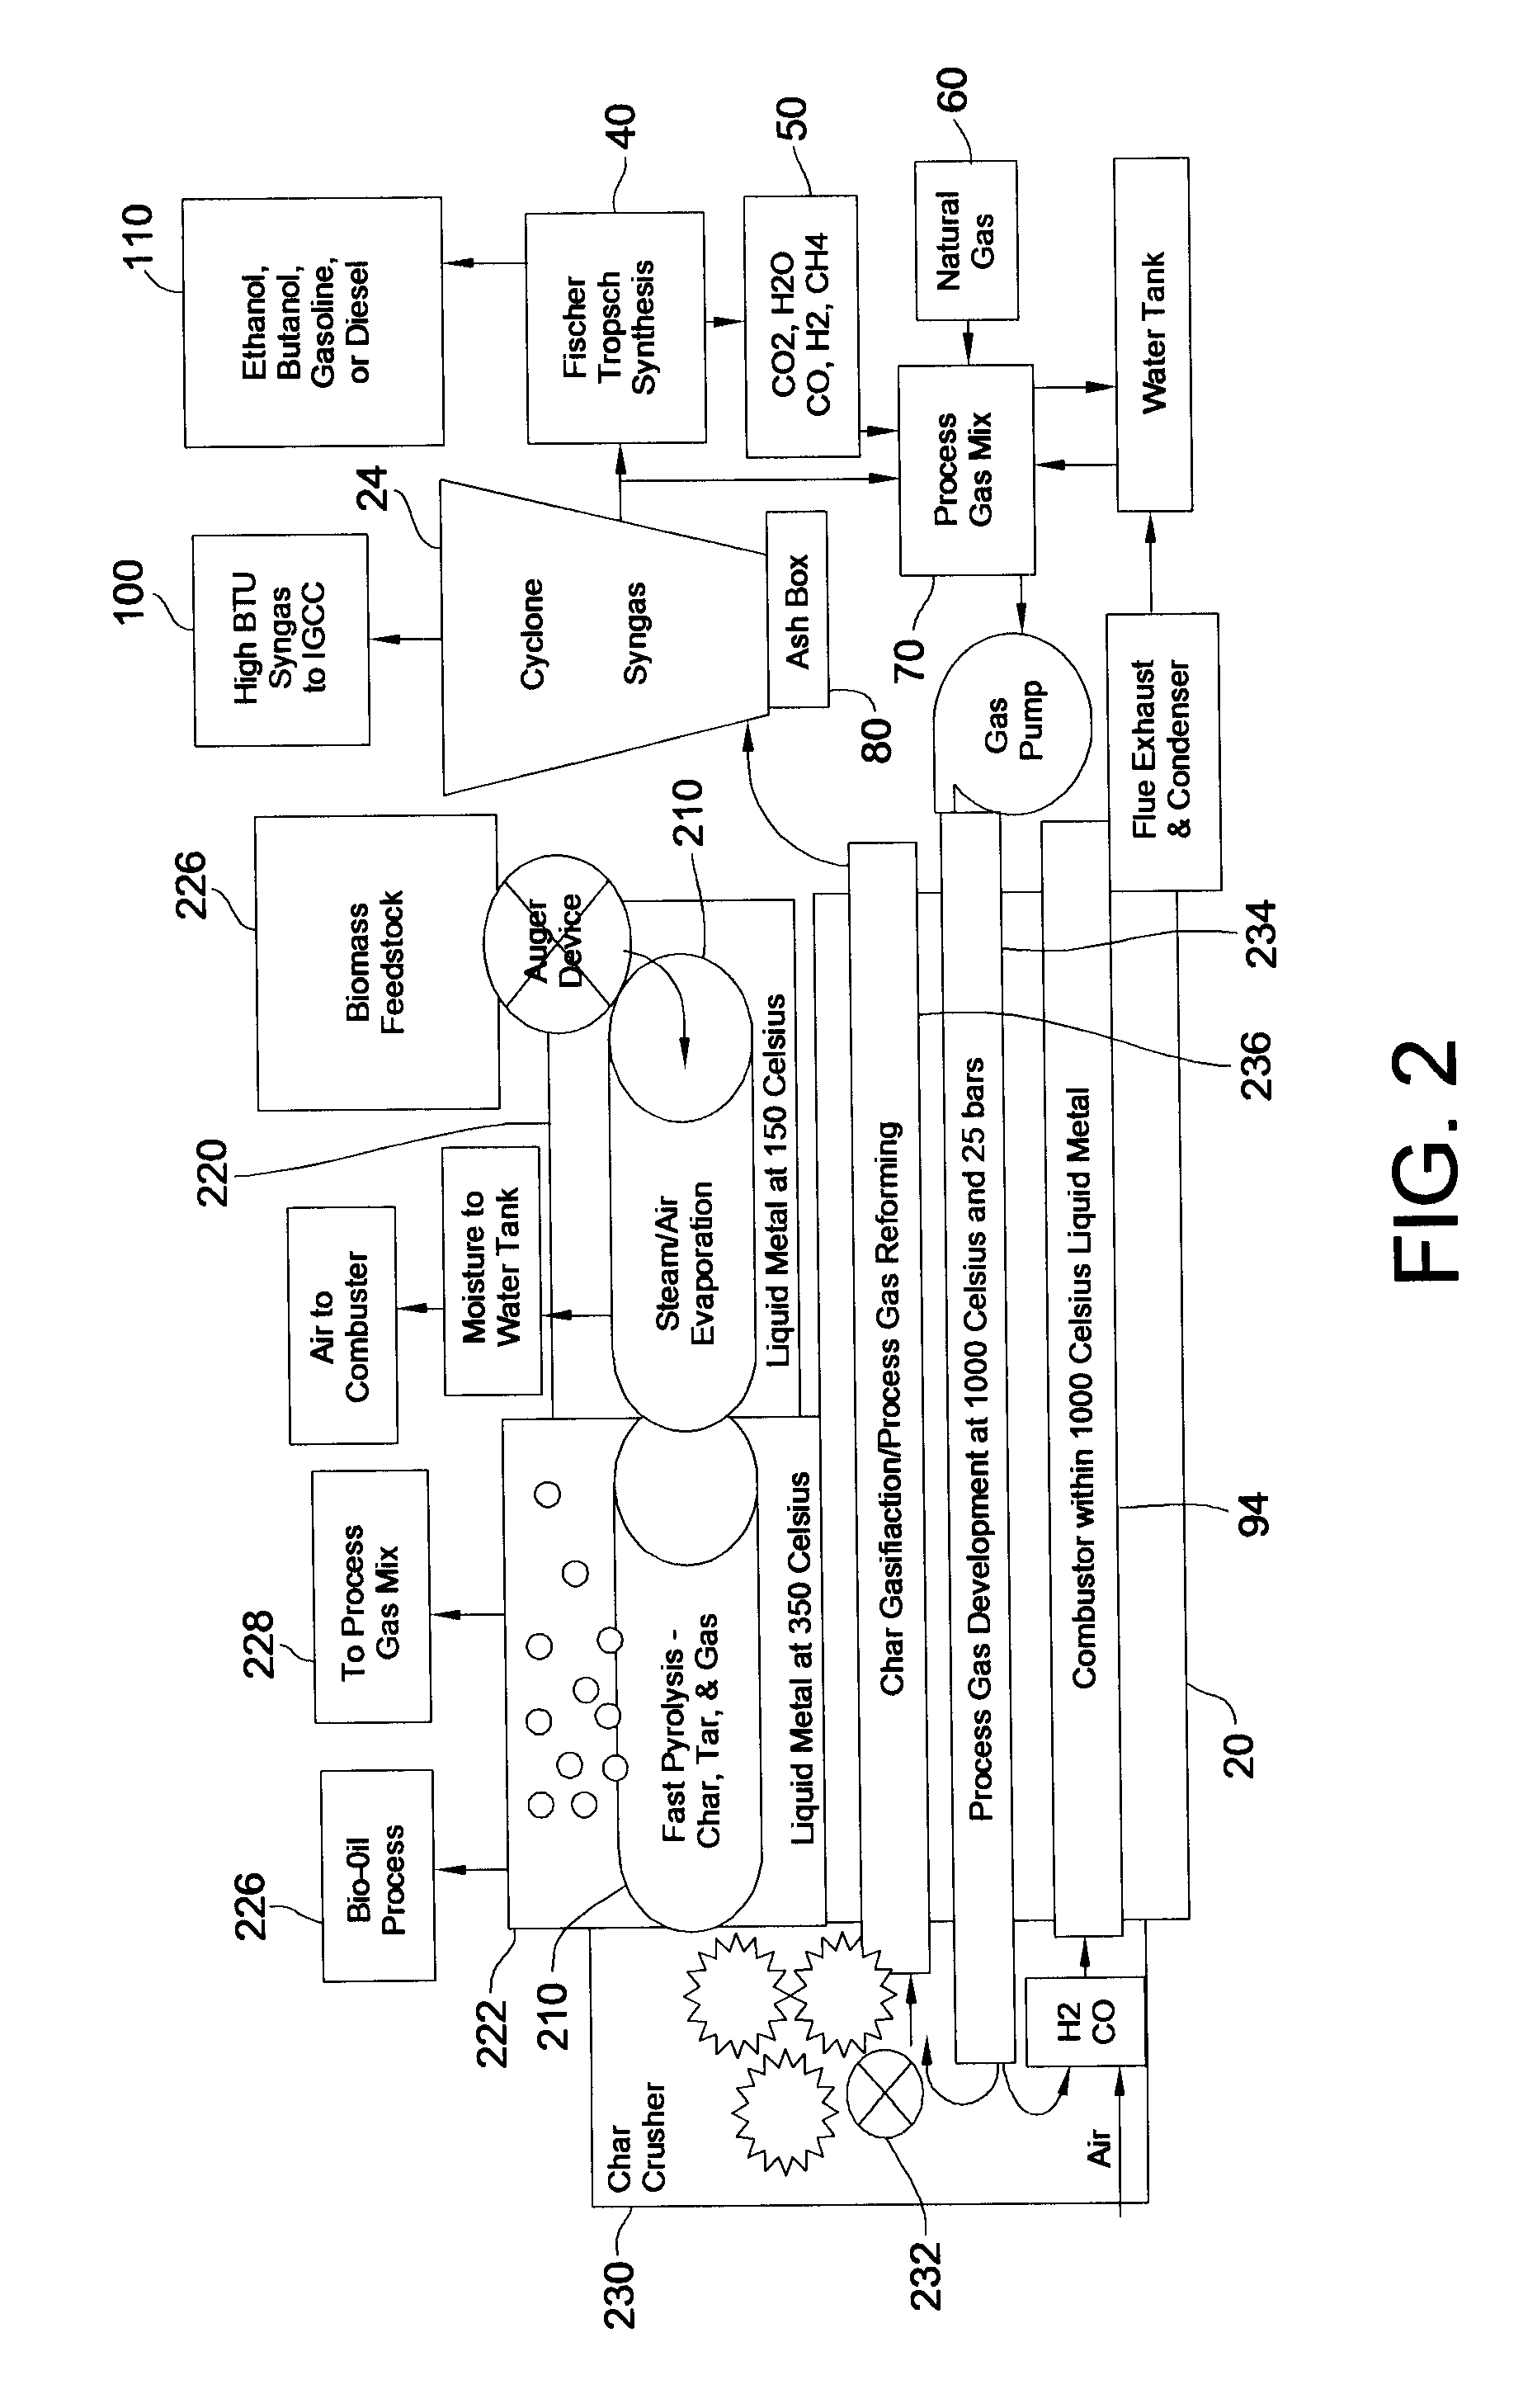 Method and apparatus to protect synthesis gas via flash pyrolysis and gasification in a molten liquid